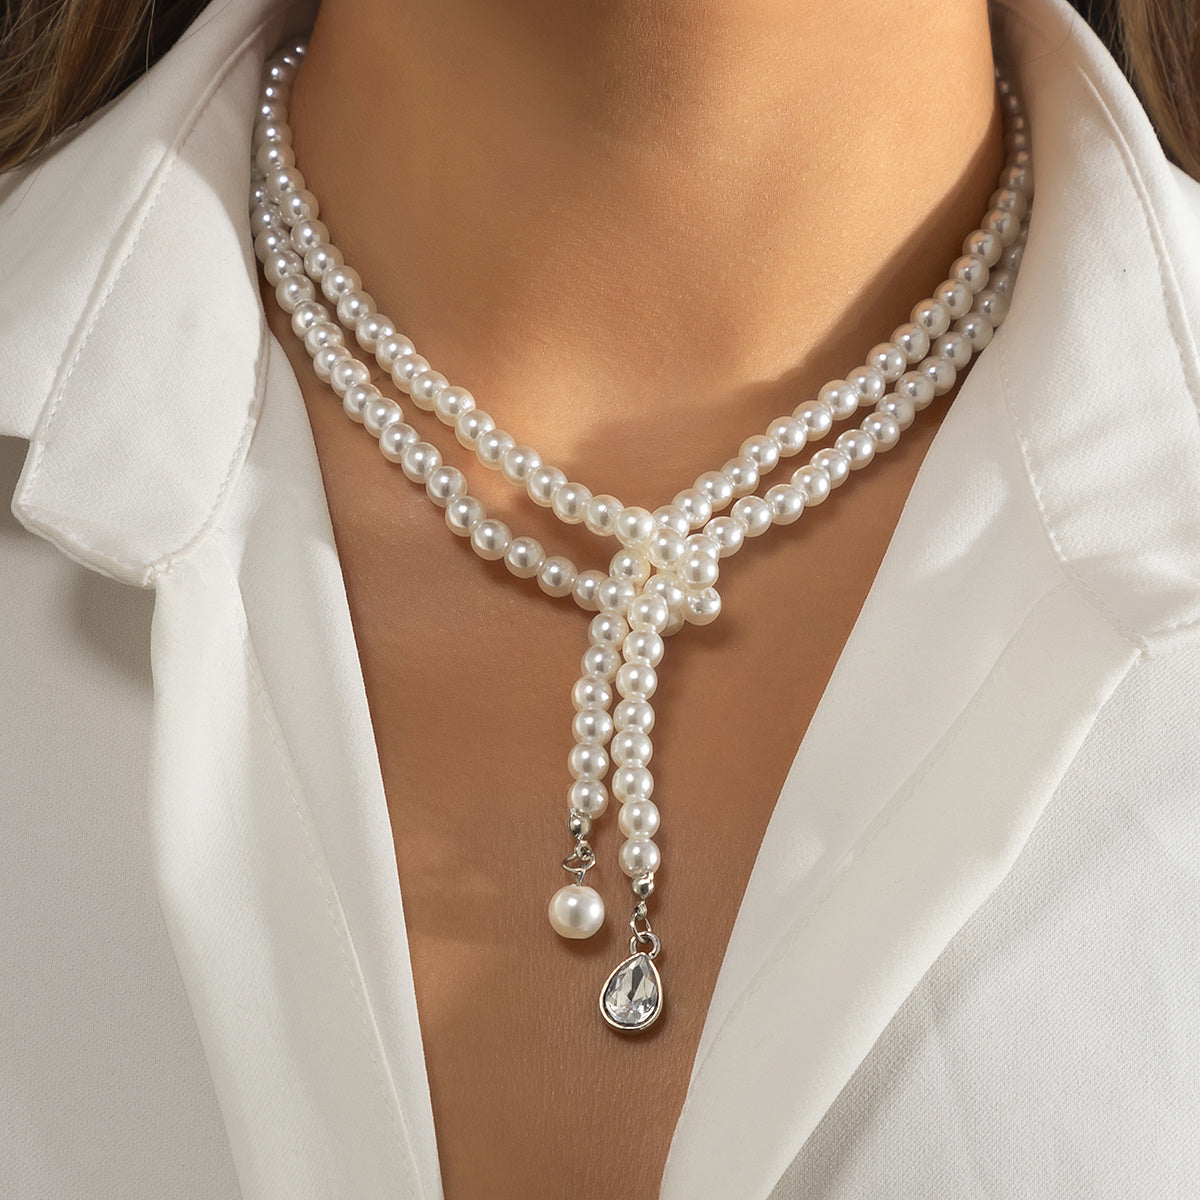 Gorgeous Pearl Gem Water Drop Pendant Necklace - Perfect for Women's Fashion!